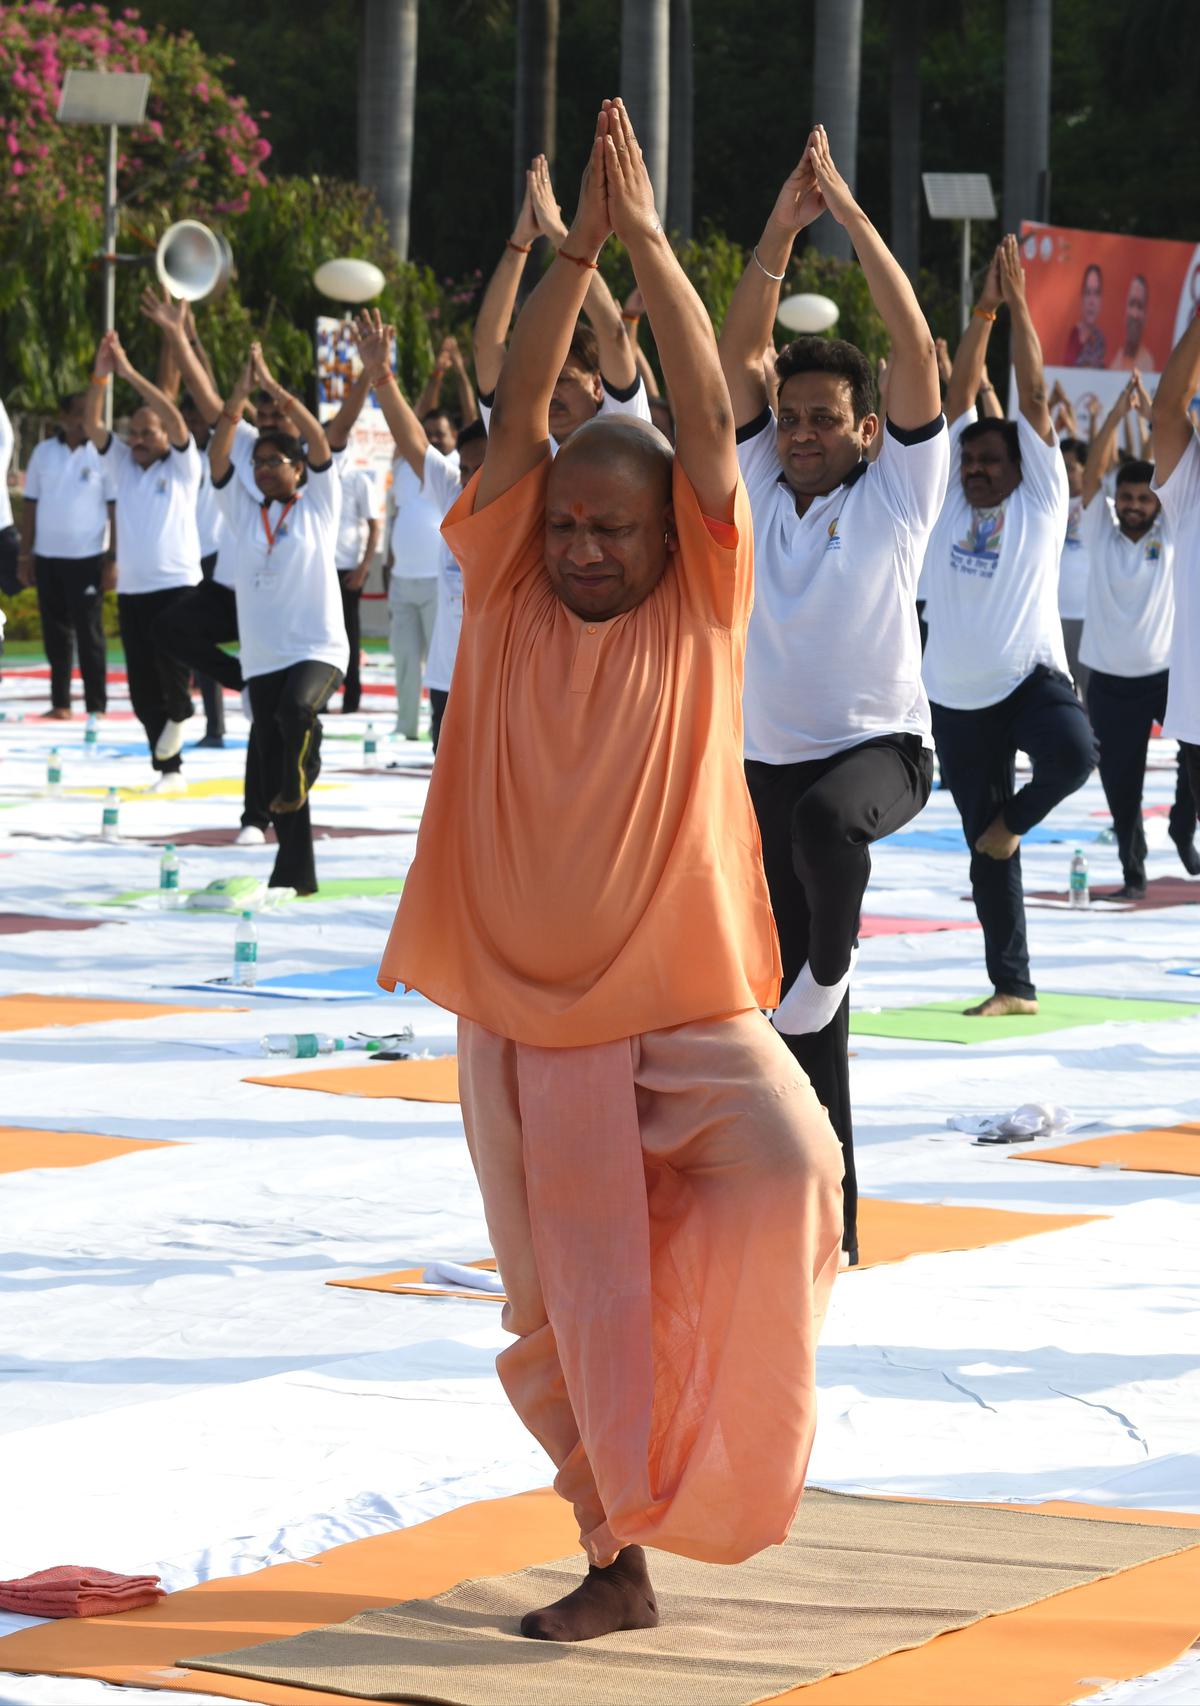 Uttar Pradesh Chief Minister Yogi Adityanath and others performing yoga during the 8th International Yoga Day celebration at Raj Bhawan, in Lucknow on Tuesday, June 21, 2022.